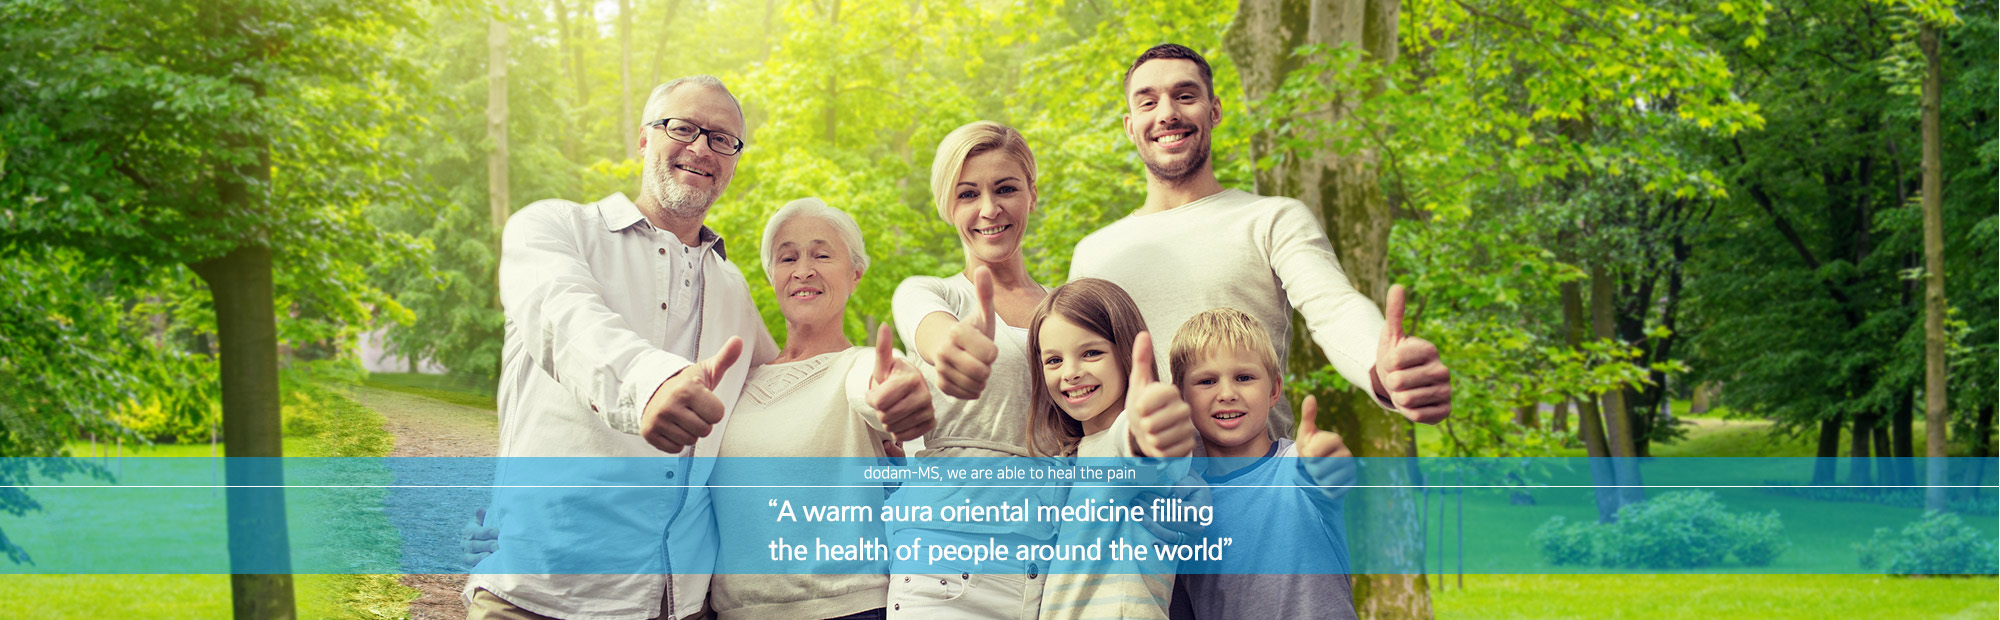 A warm aura oriental medicine filling the health of people around the world